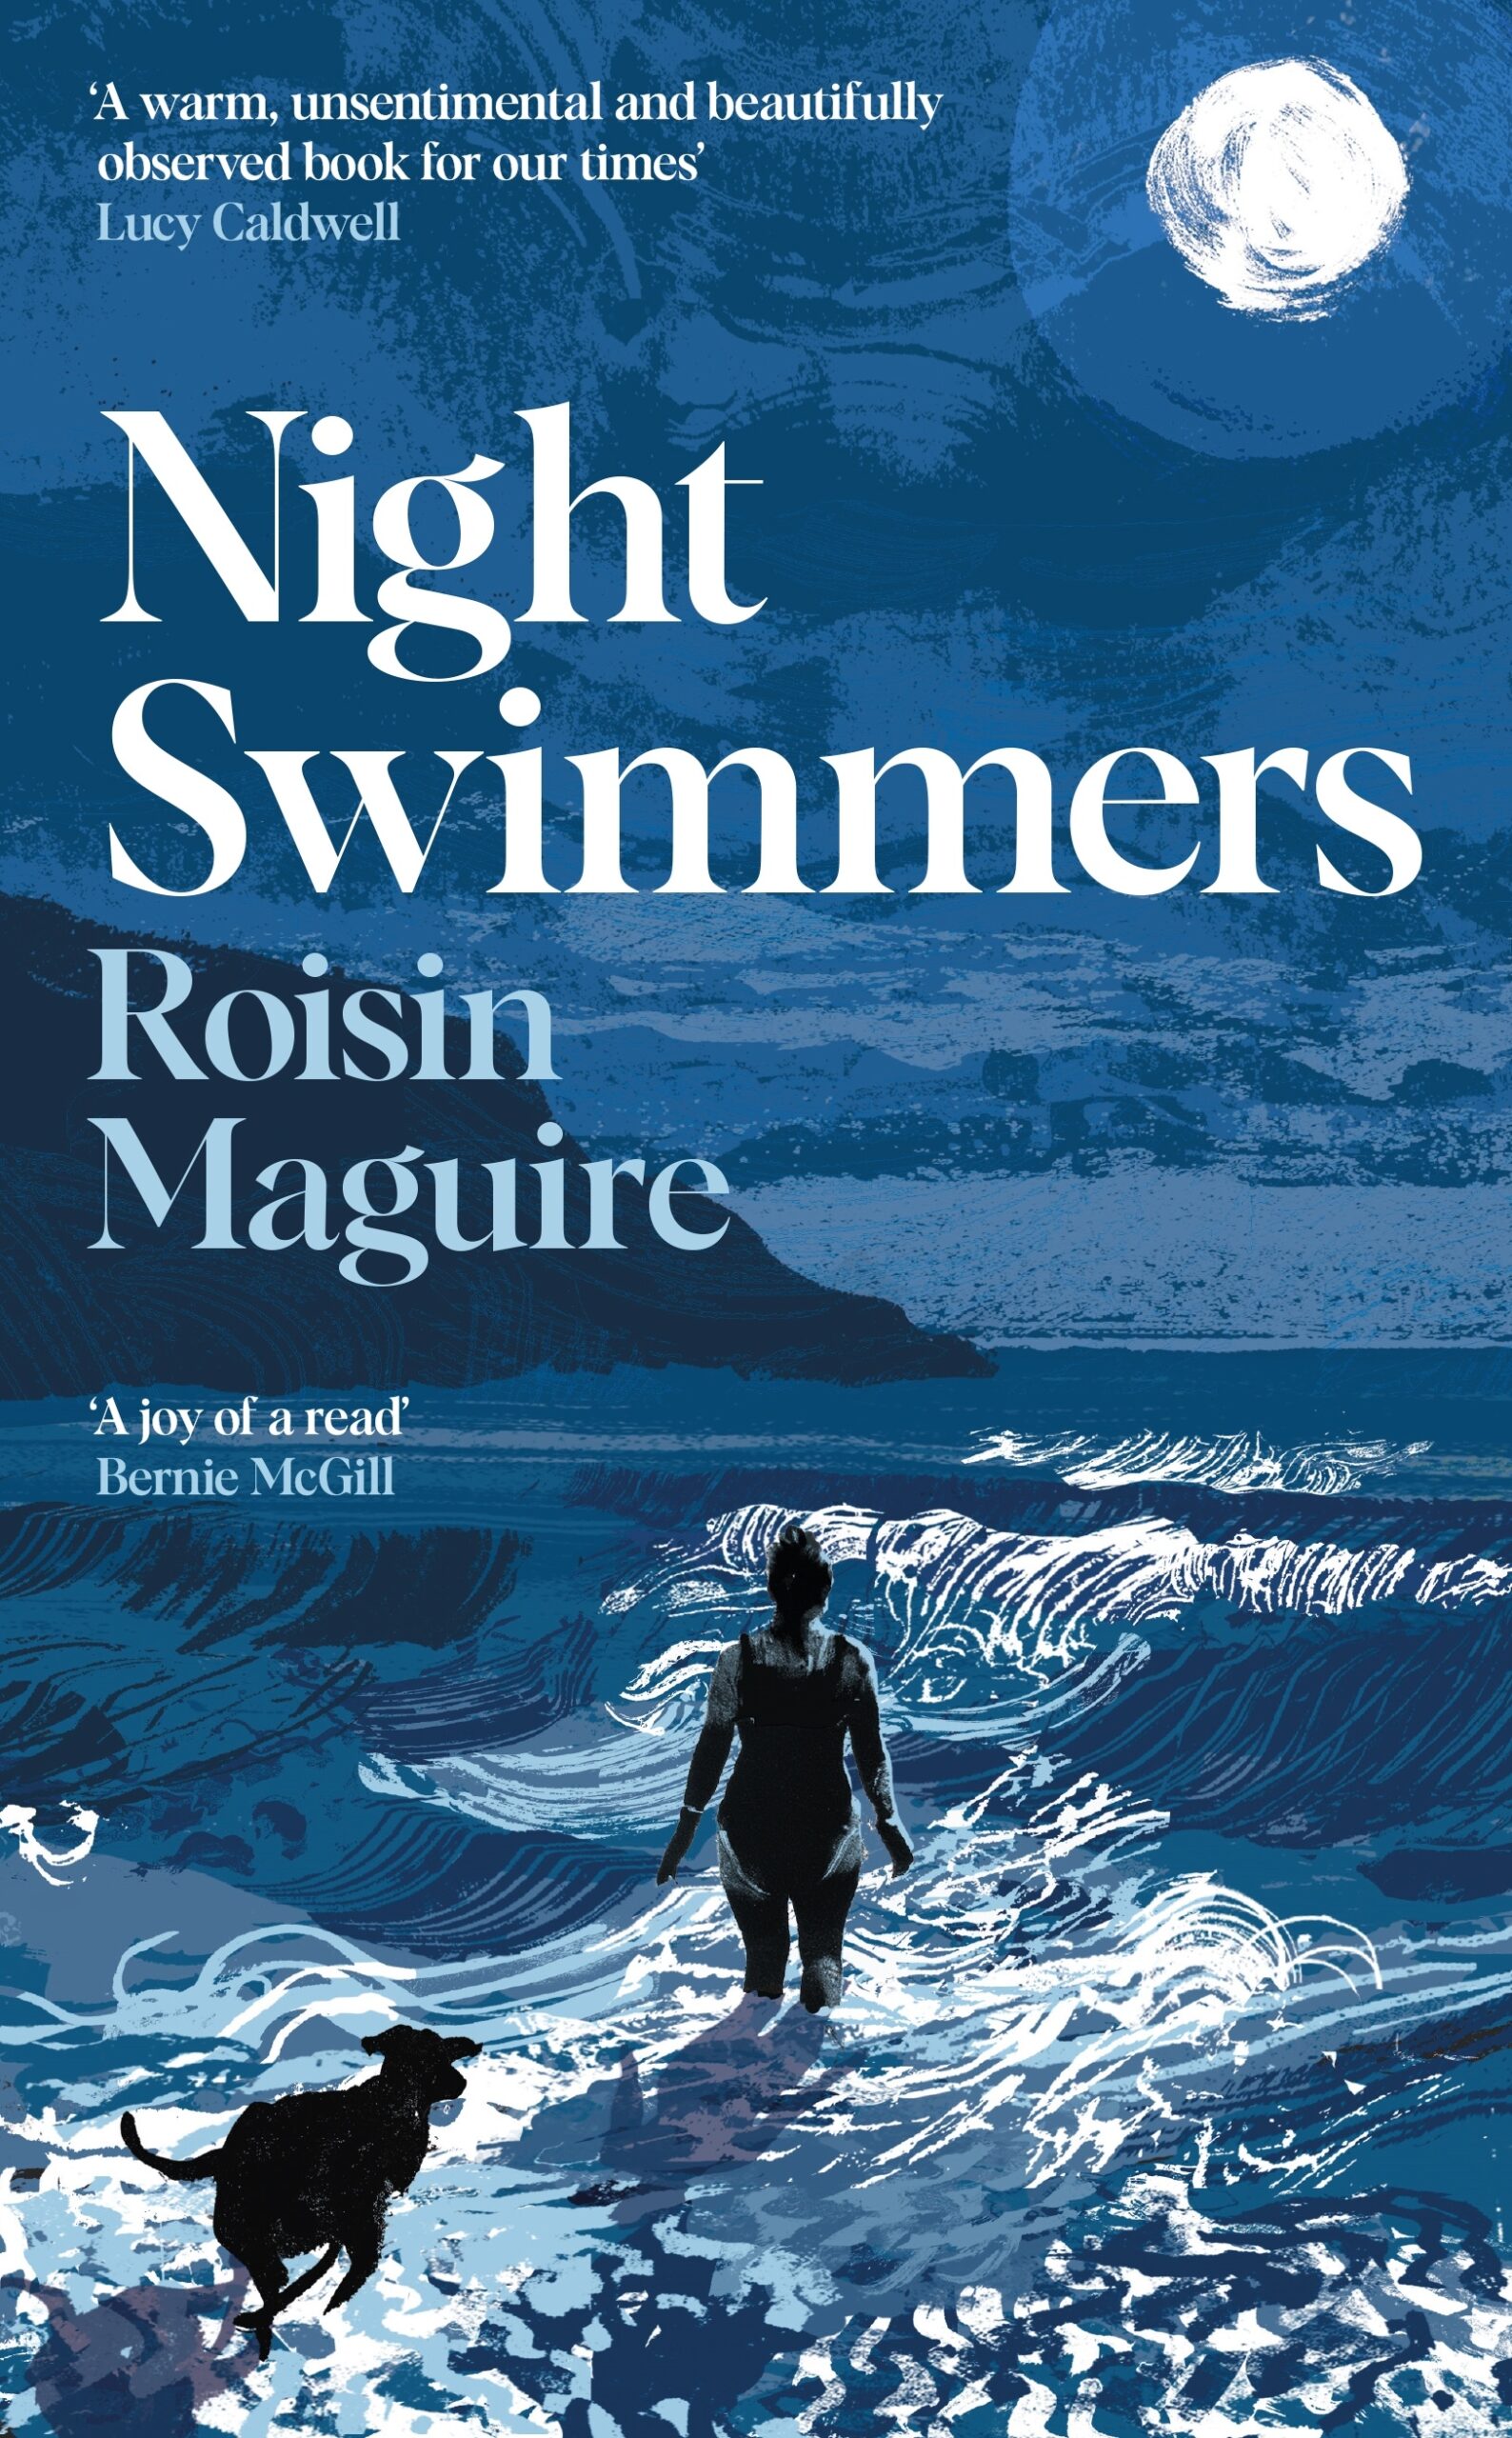 Night Swimmers by Róisín Maguire